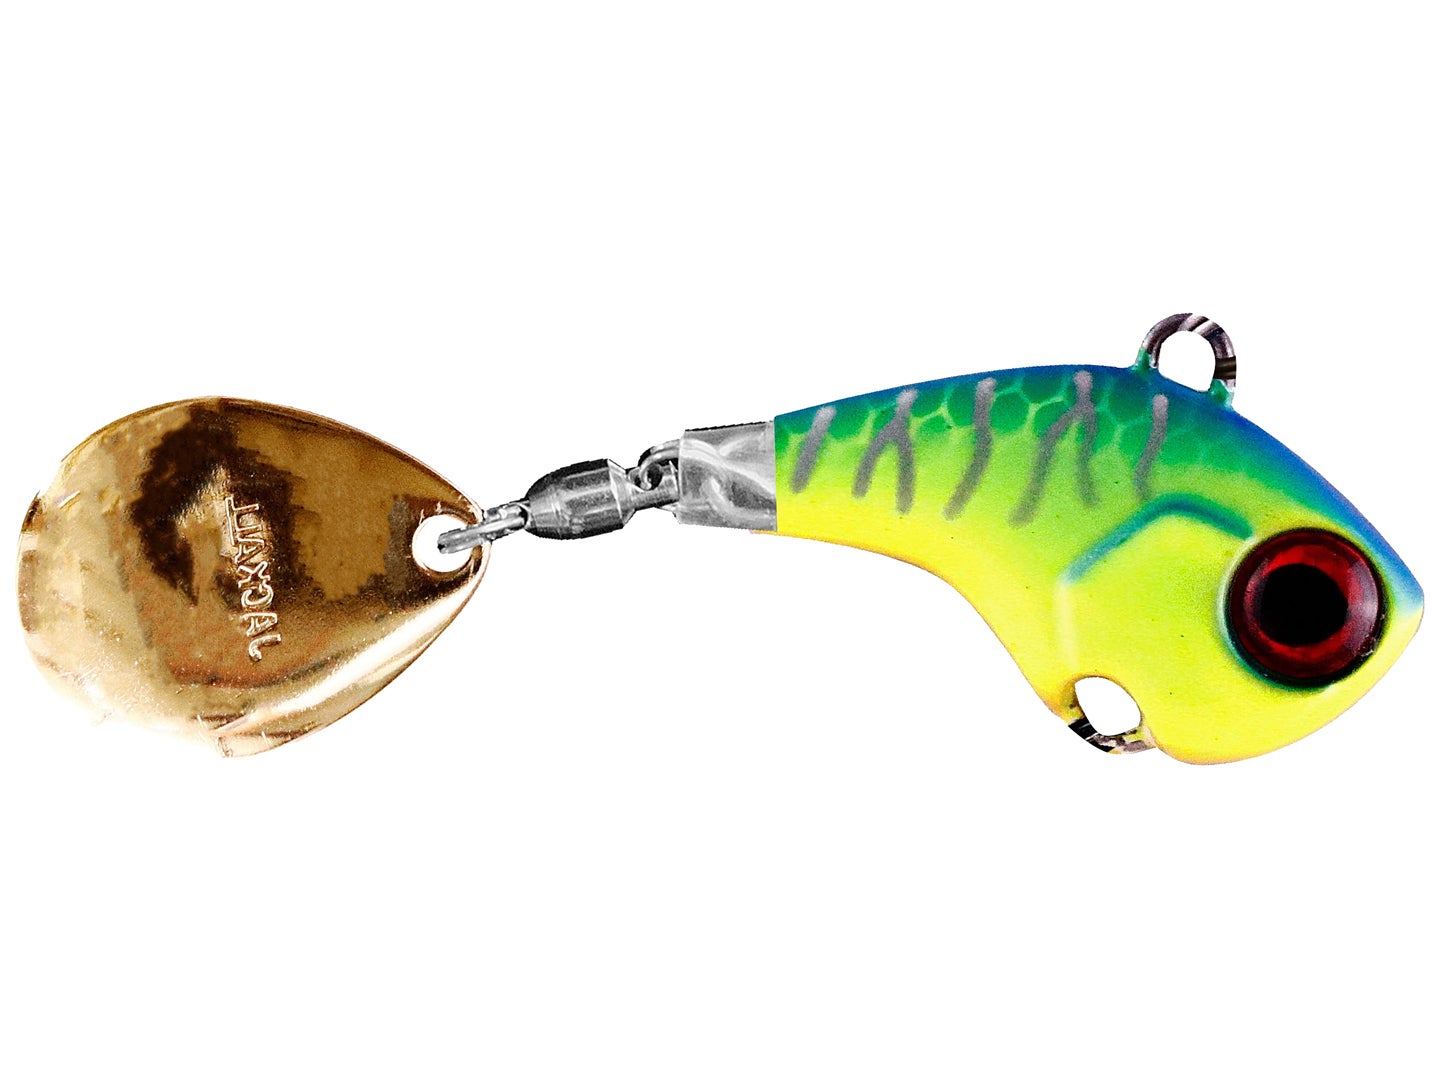 2802 Jackall Deracoup 1/4 oz Spin Tail Sinking Lure HL Ayu